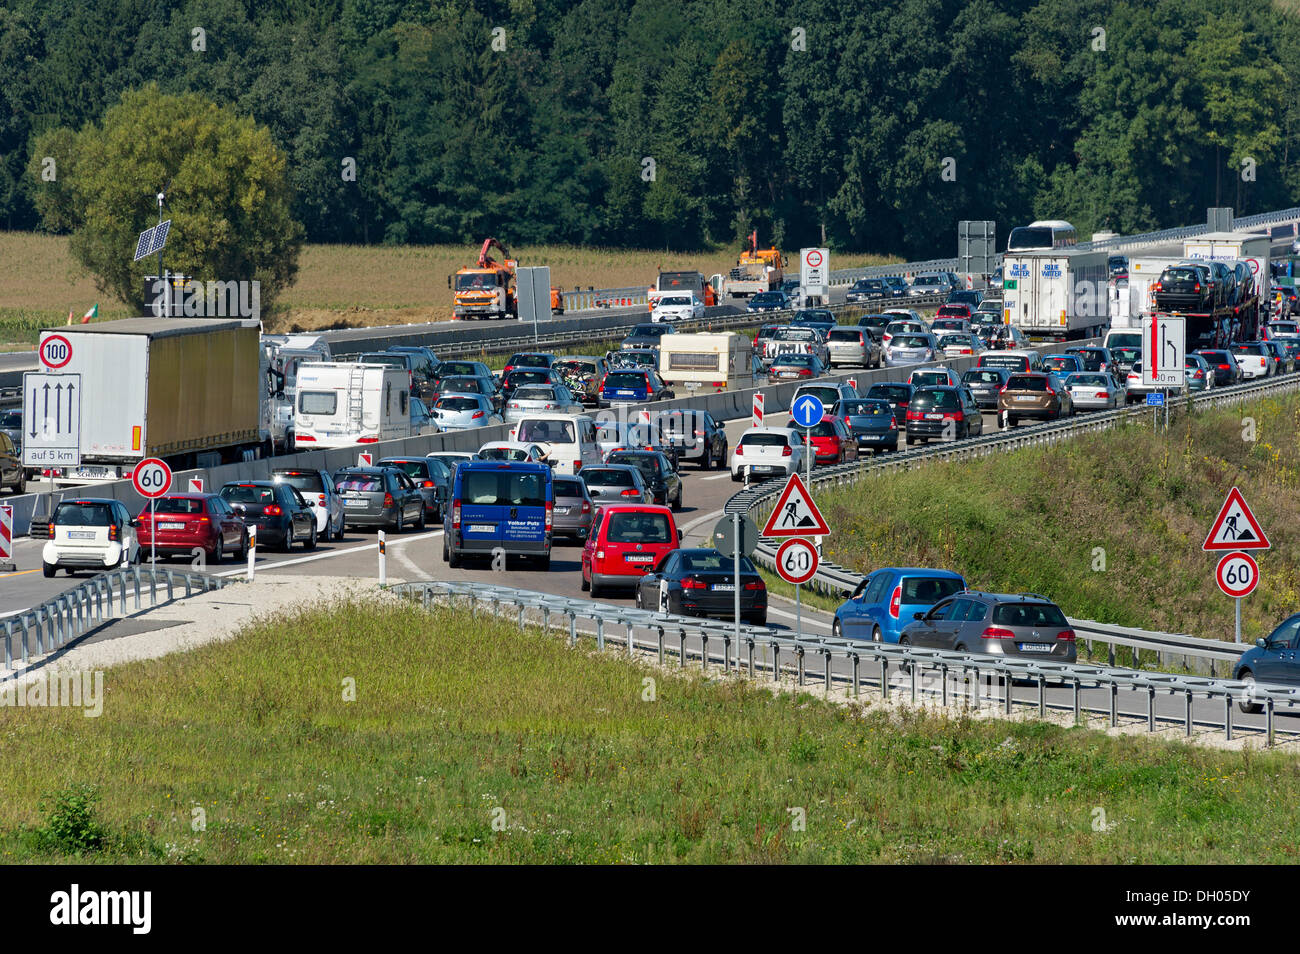 Traffic jam at a construction site at Autobahnkreuz Neufahrn interchange, Autobahnkreuz Neufahrn, Neufahrn, Lkr, Freising Stock Photo